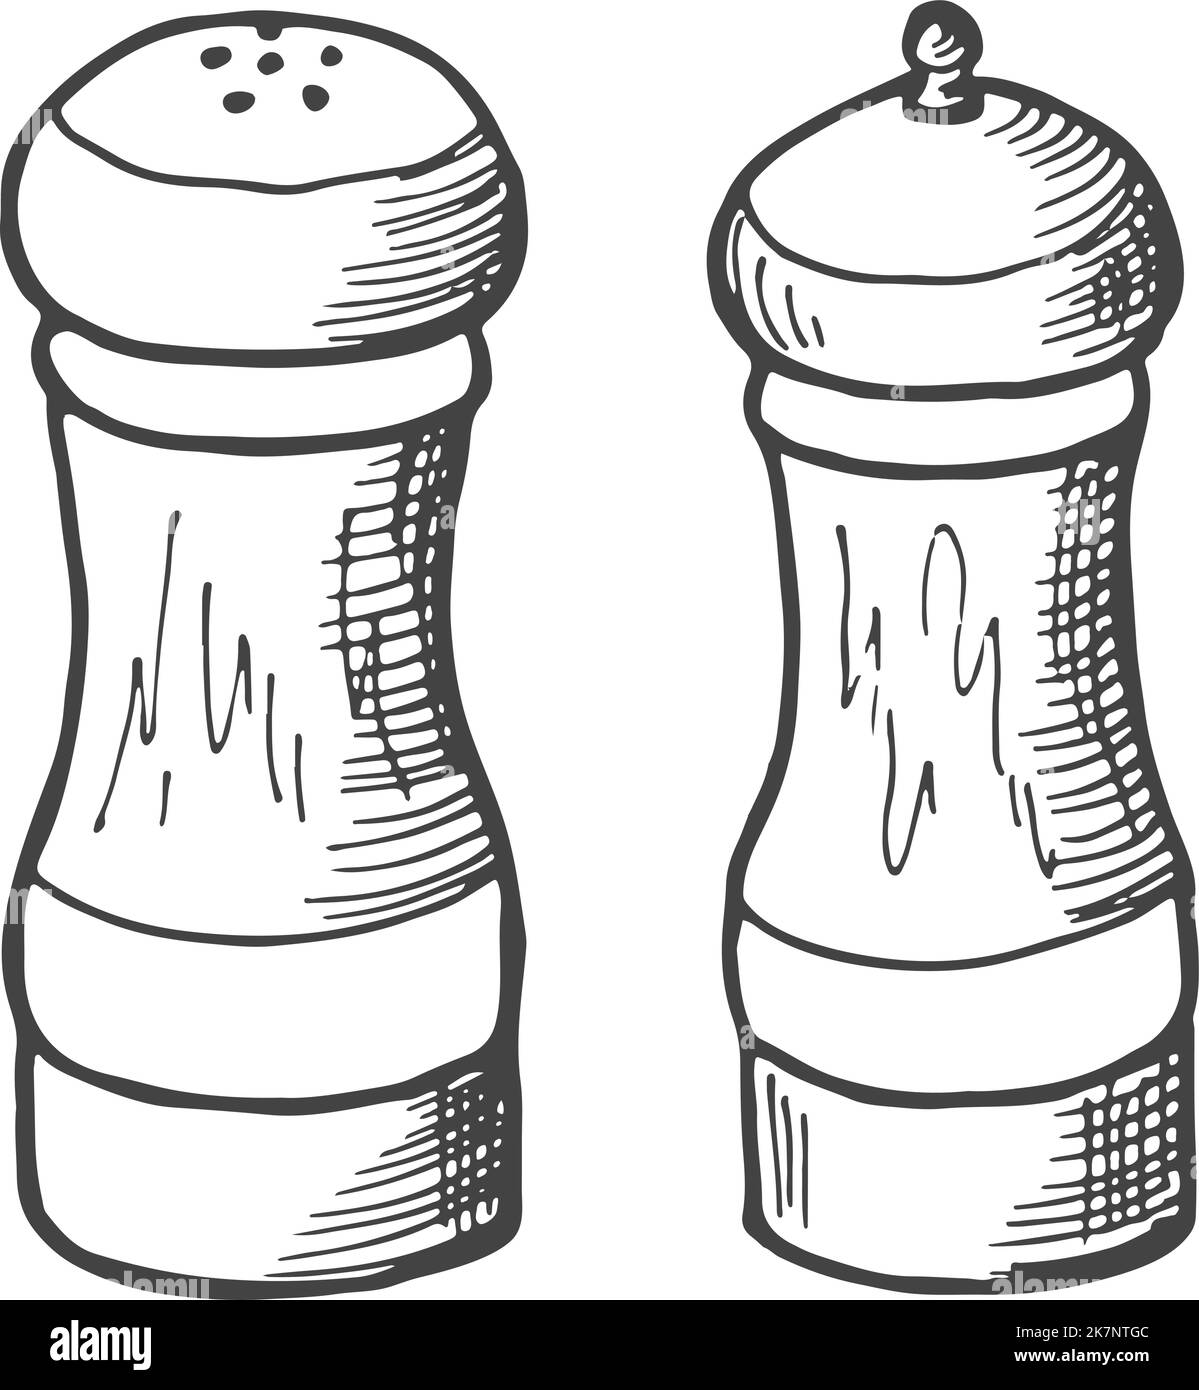 Salt and pepper shakers engravings. Cooking equipment icon Stock Vector